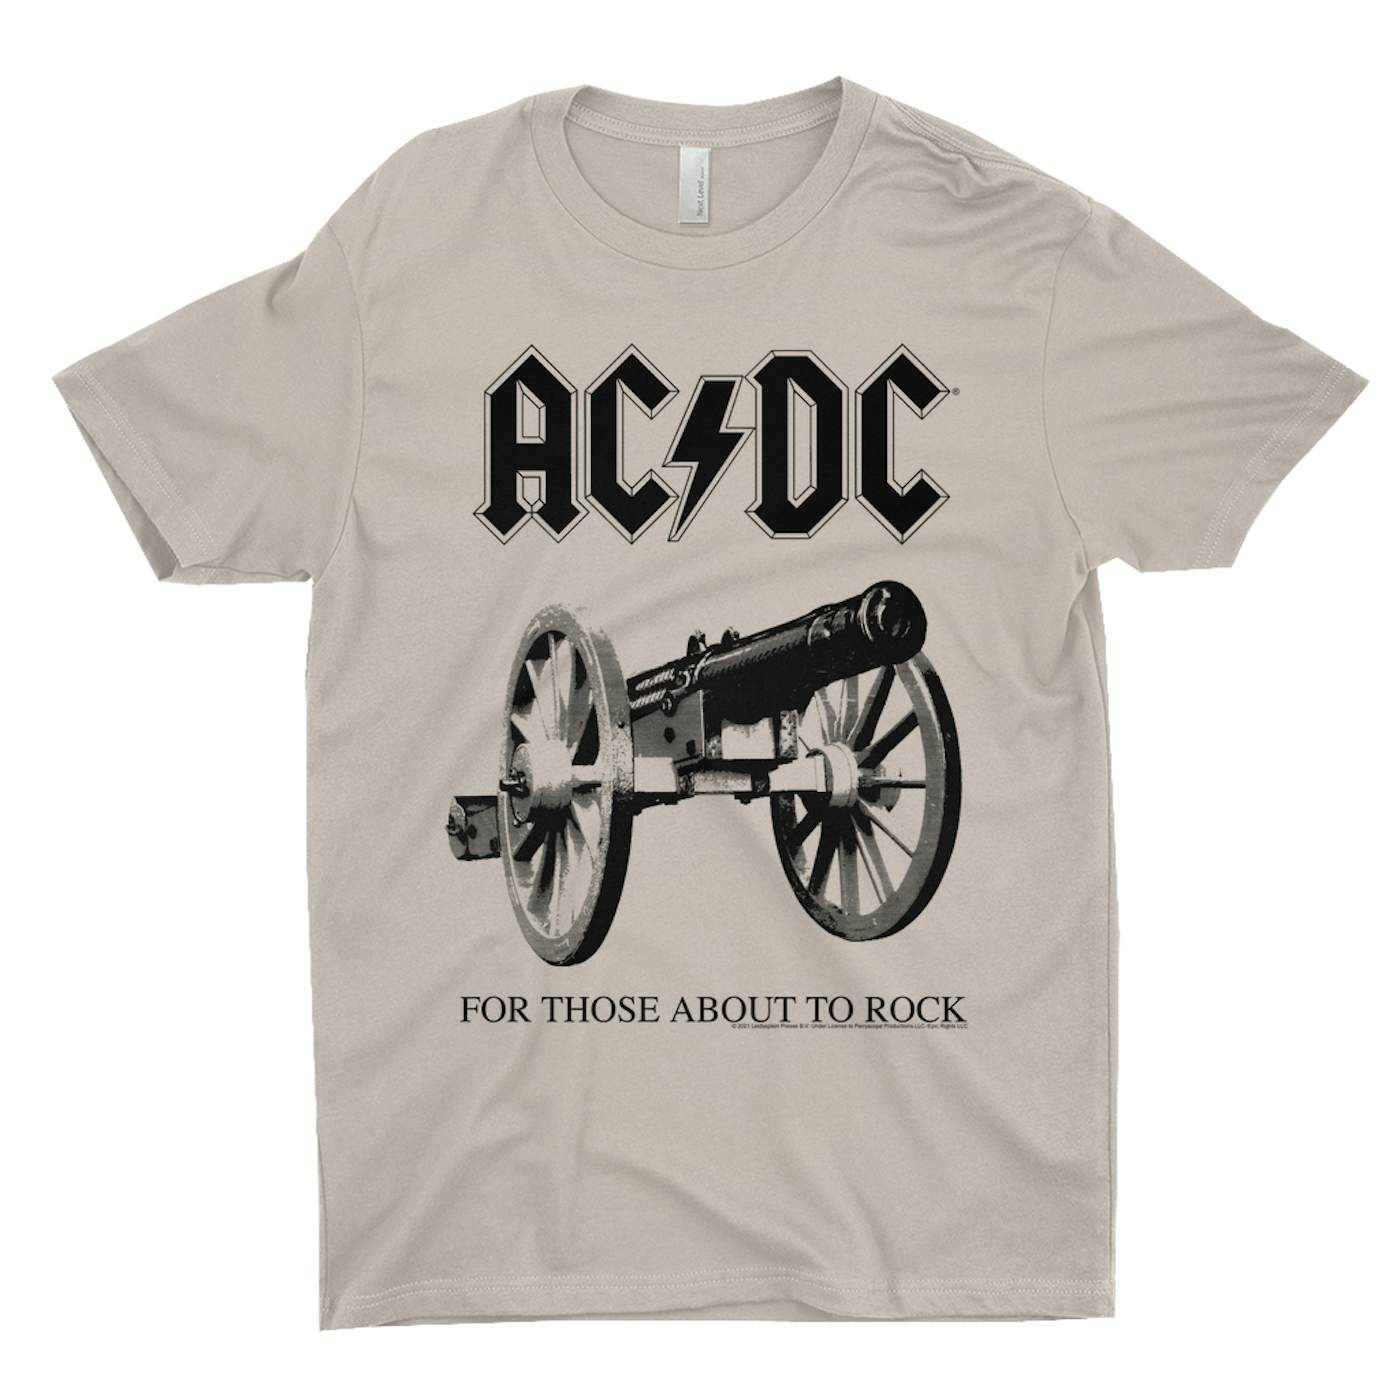 Black Shirt Rock AC/DC About Those Cannon T-Shirt Image For | To